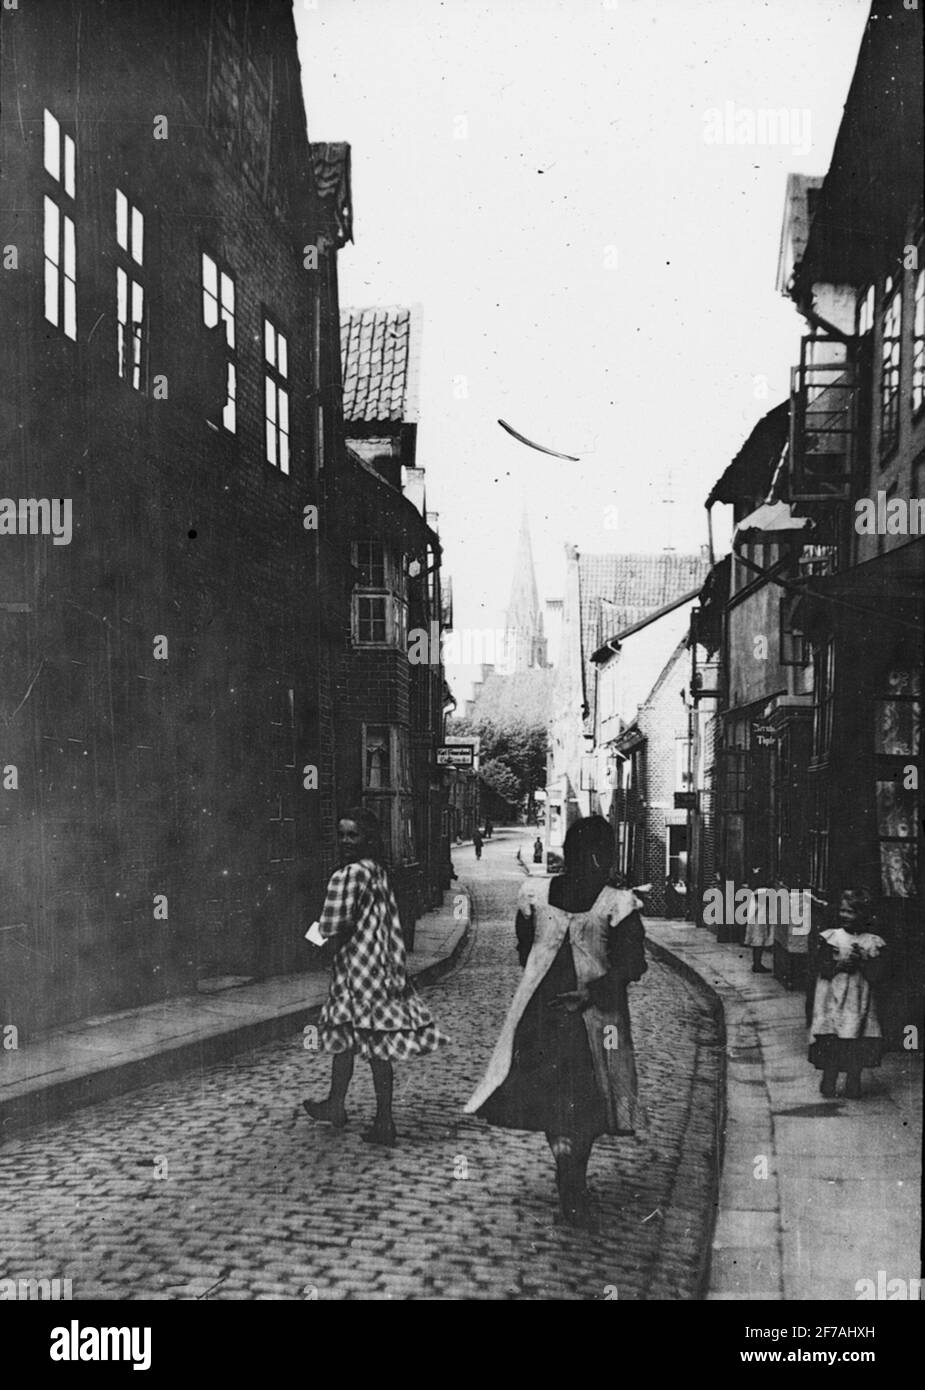 Skioppty view with motifs of women and children on street in Lüneburg.The image has been stored in cardboard labeled: spring trip 1909. Lübeck 1. Lüneburg 4. Celle 4. I. Text on image: 'AUF them meere'. Stock Photo